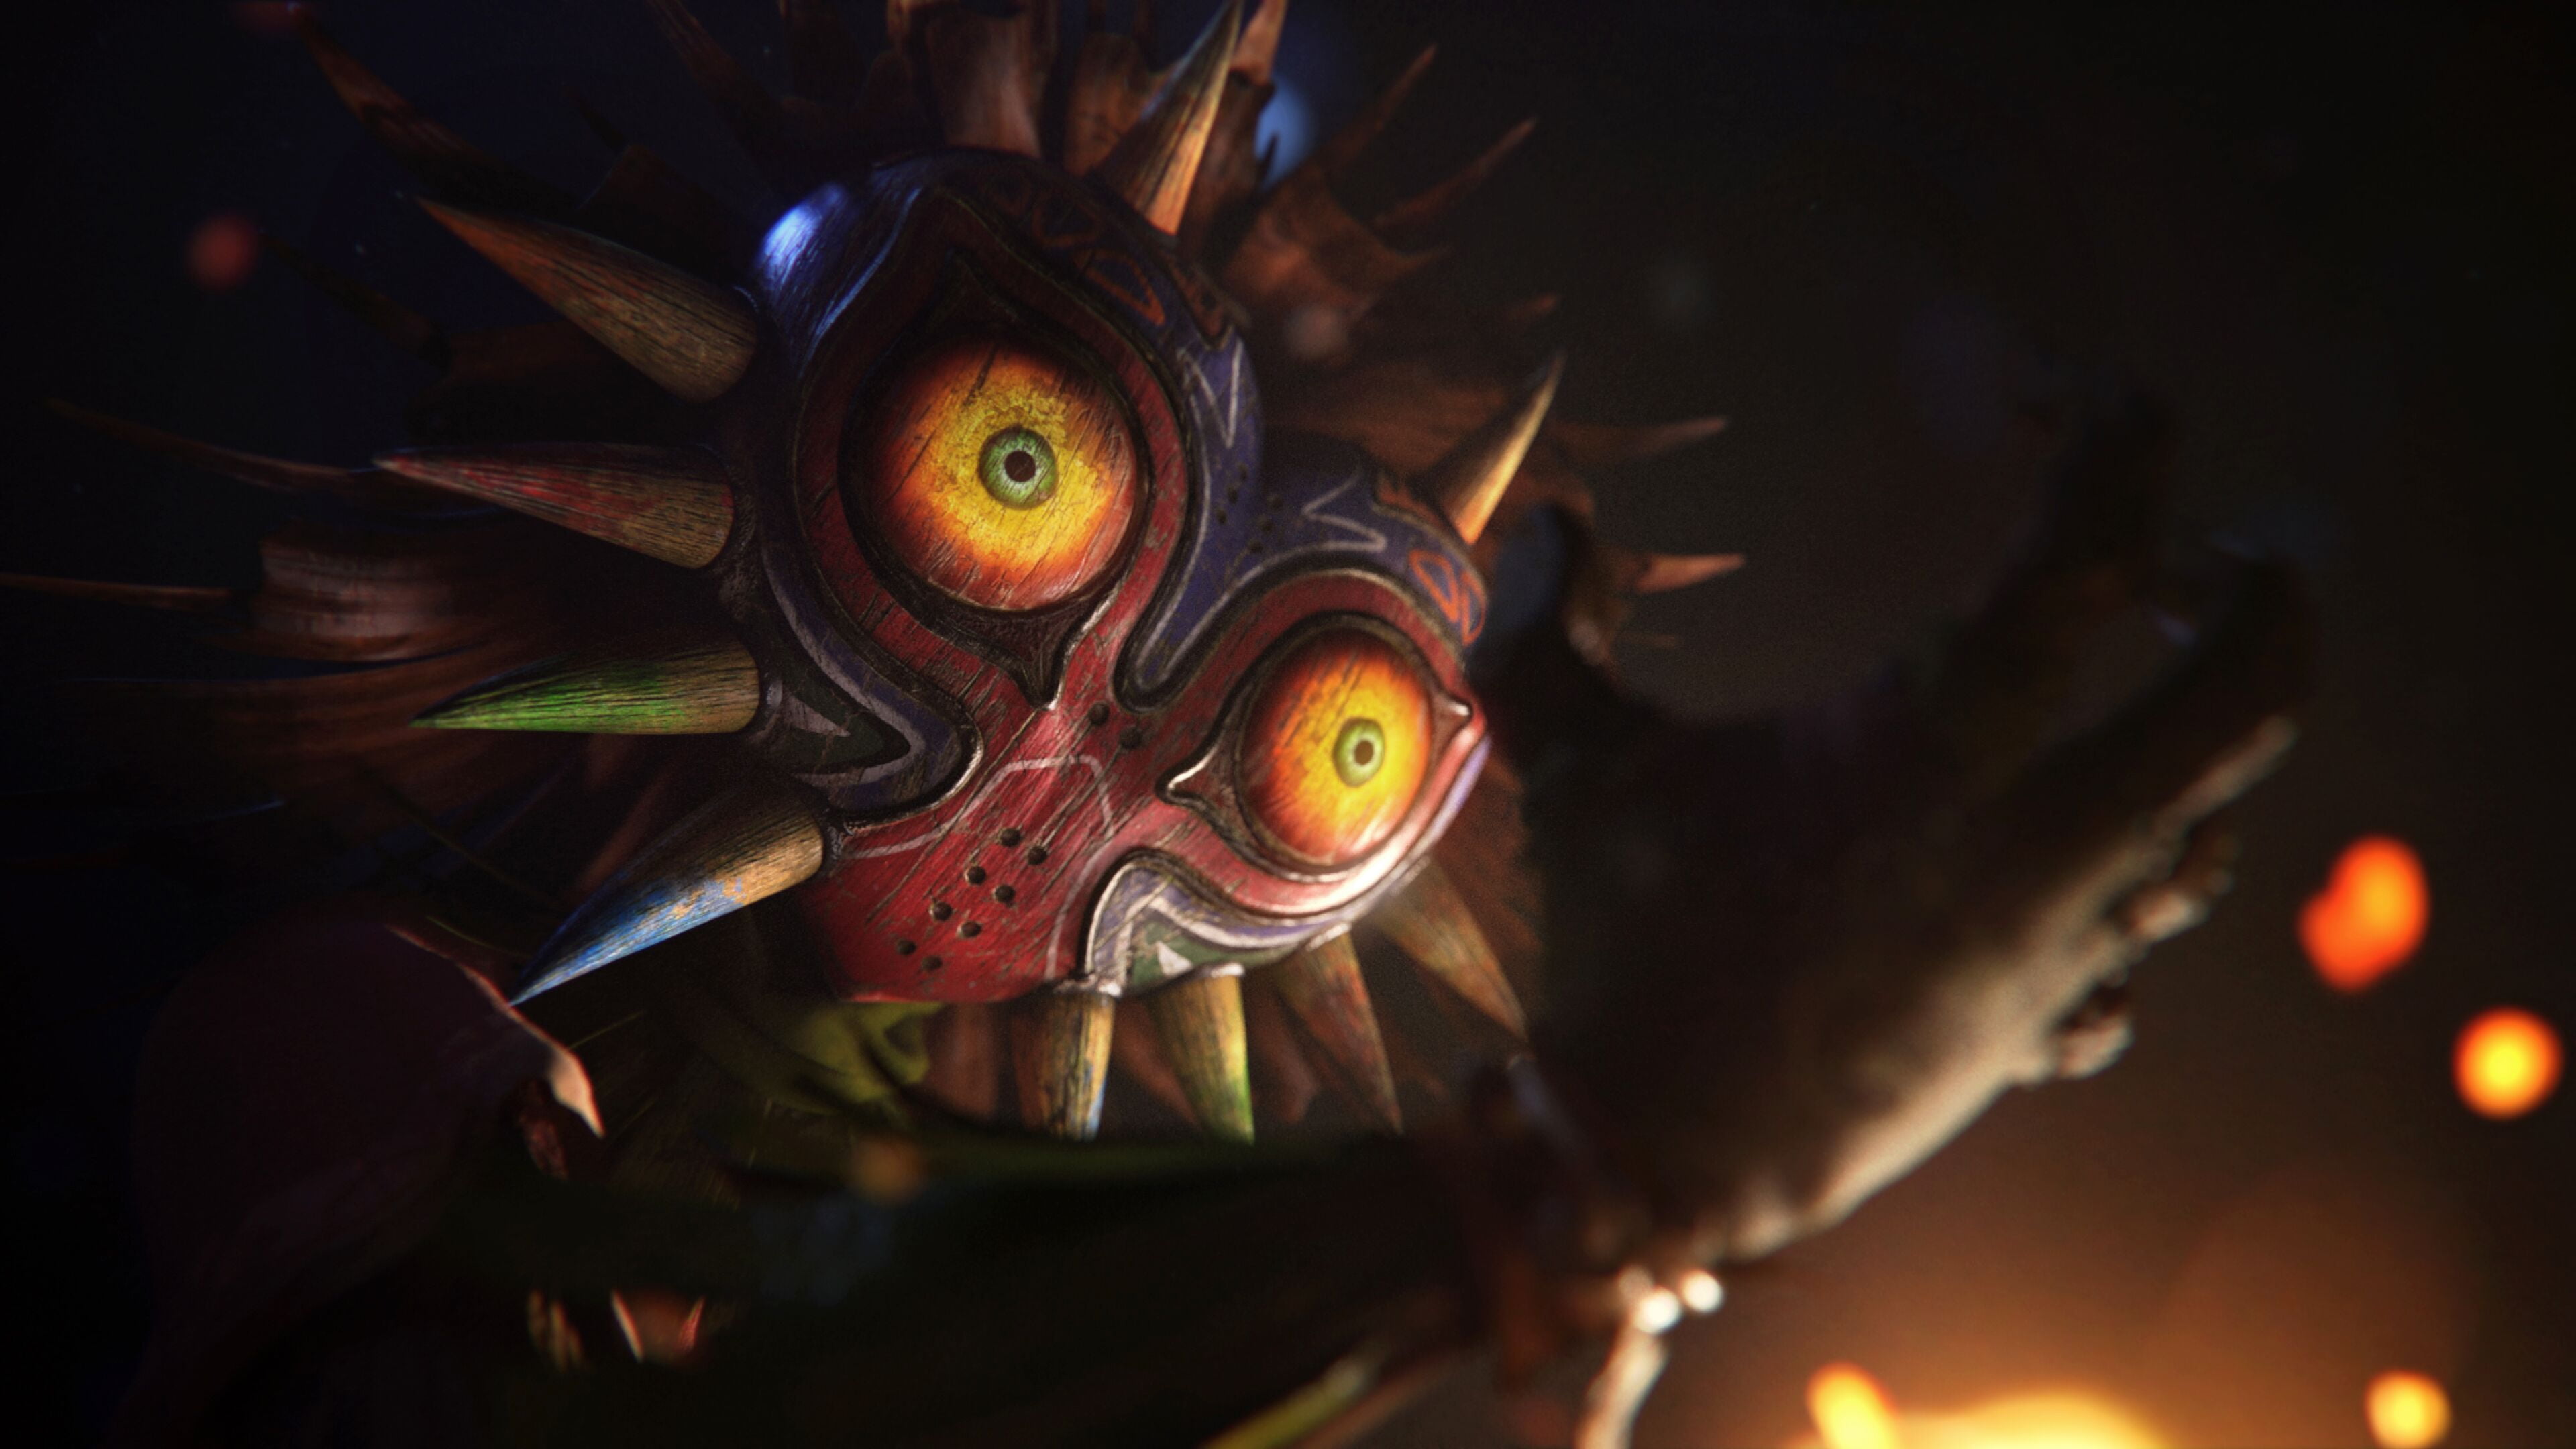 yellow and red monster mask, The Legend of Zelda: Majora's Mask